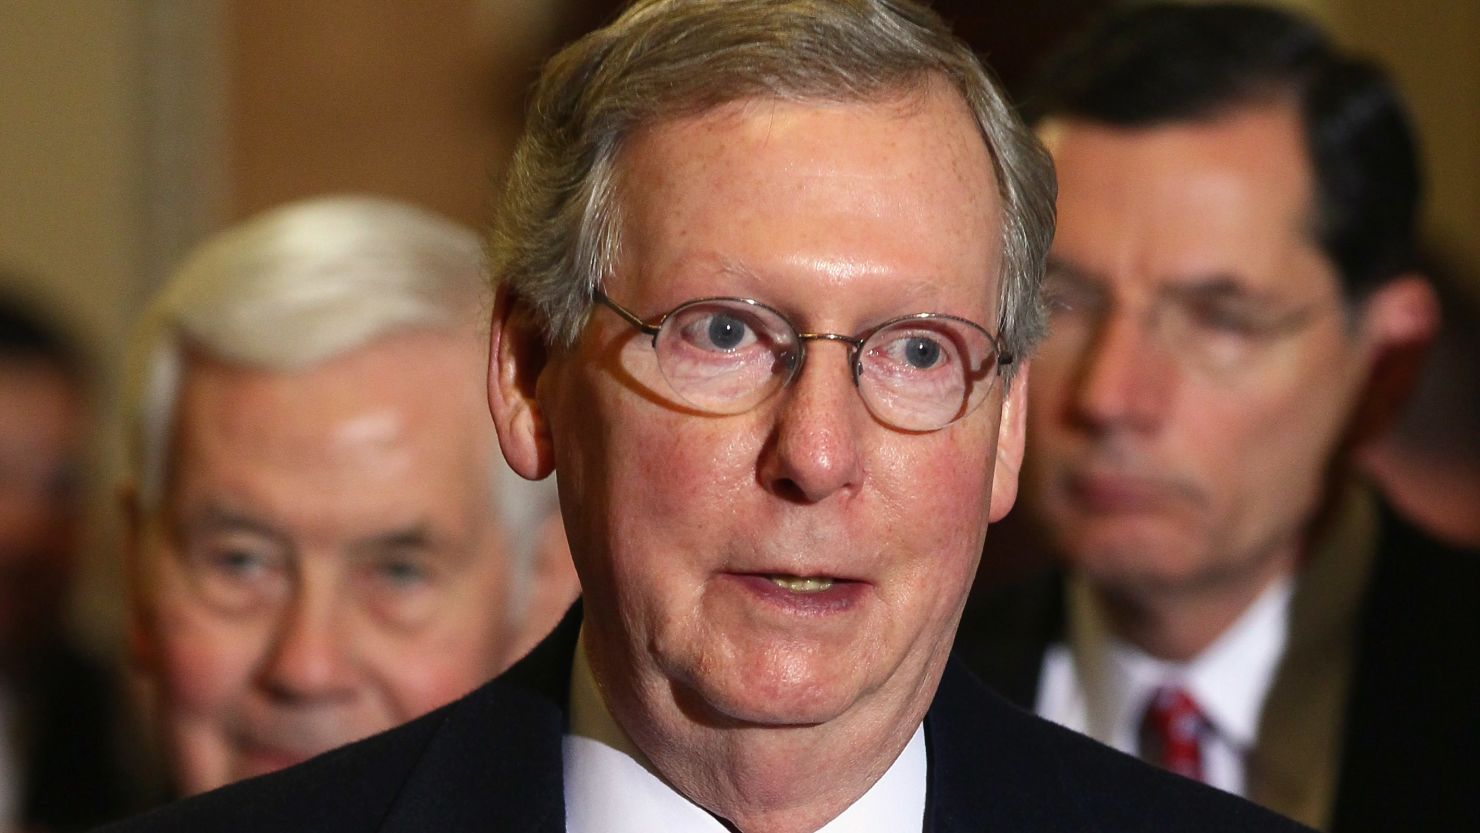 Senate Republican leader Mitch McConnell: "Obviously we'll reach an agreement" to extend the payroll tax cut.